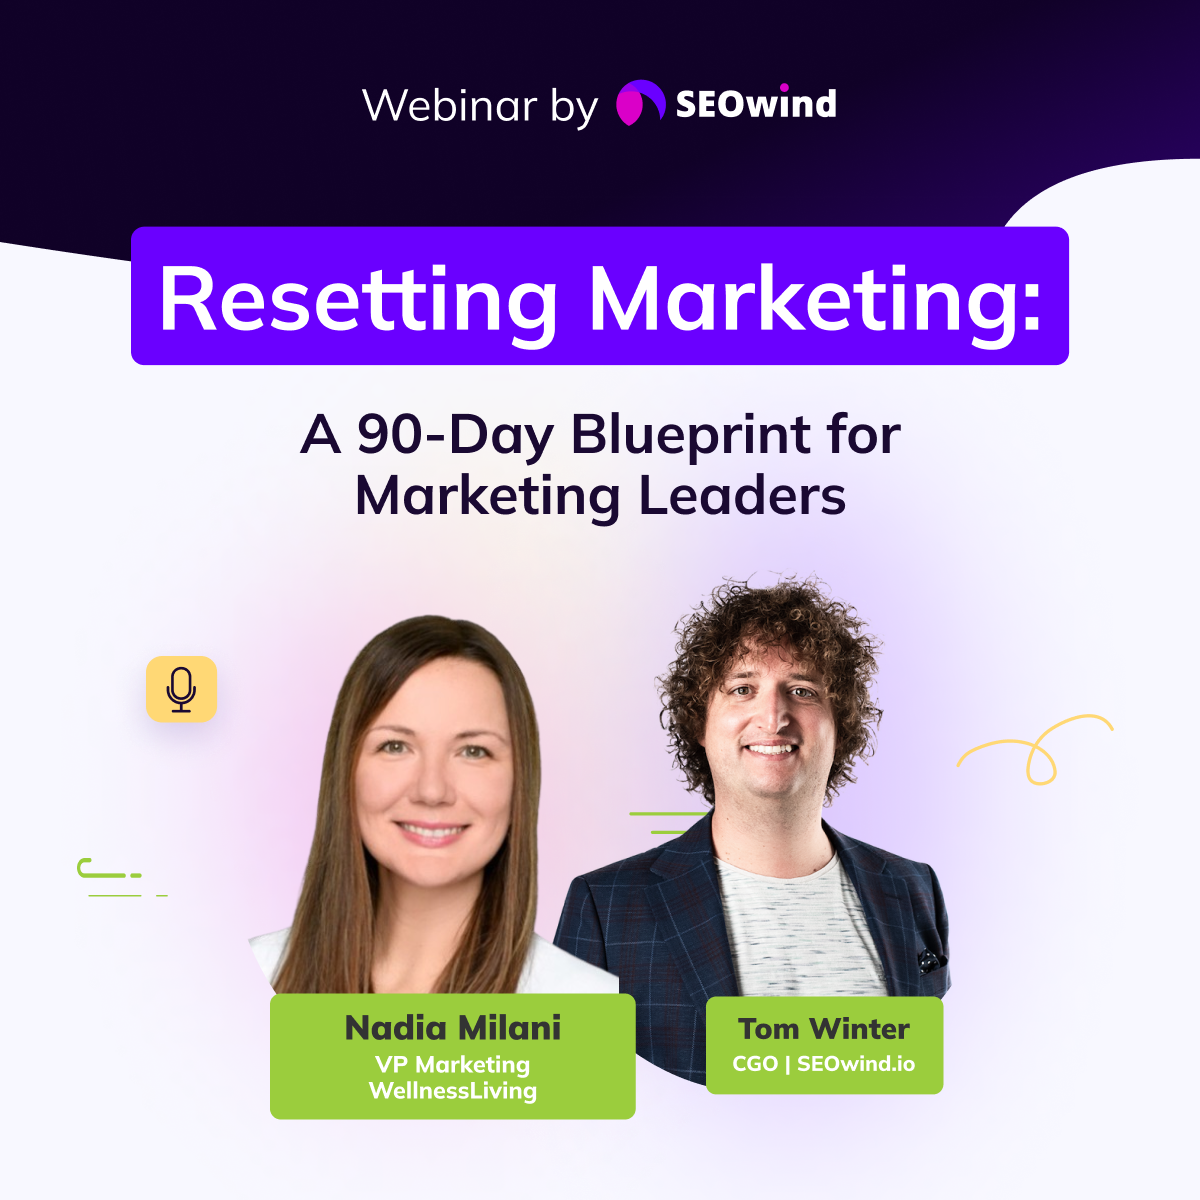 Resetting Marketing: A 90-Day Blueprint for Marketing Leaders with Nadia Milani